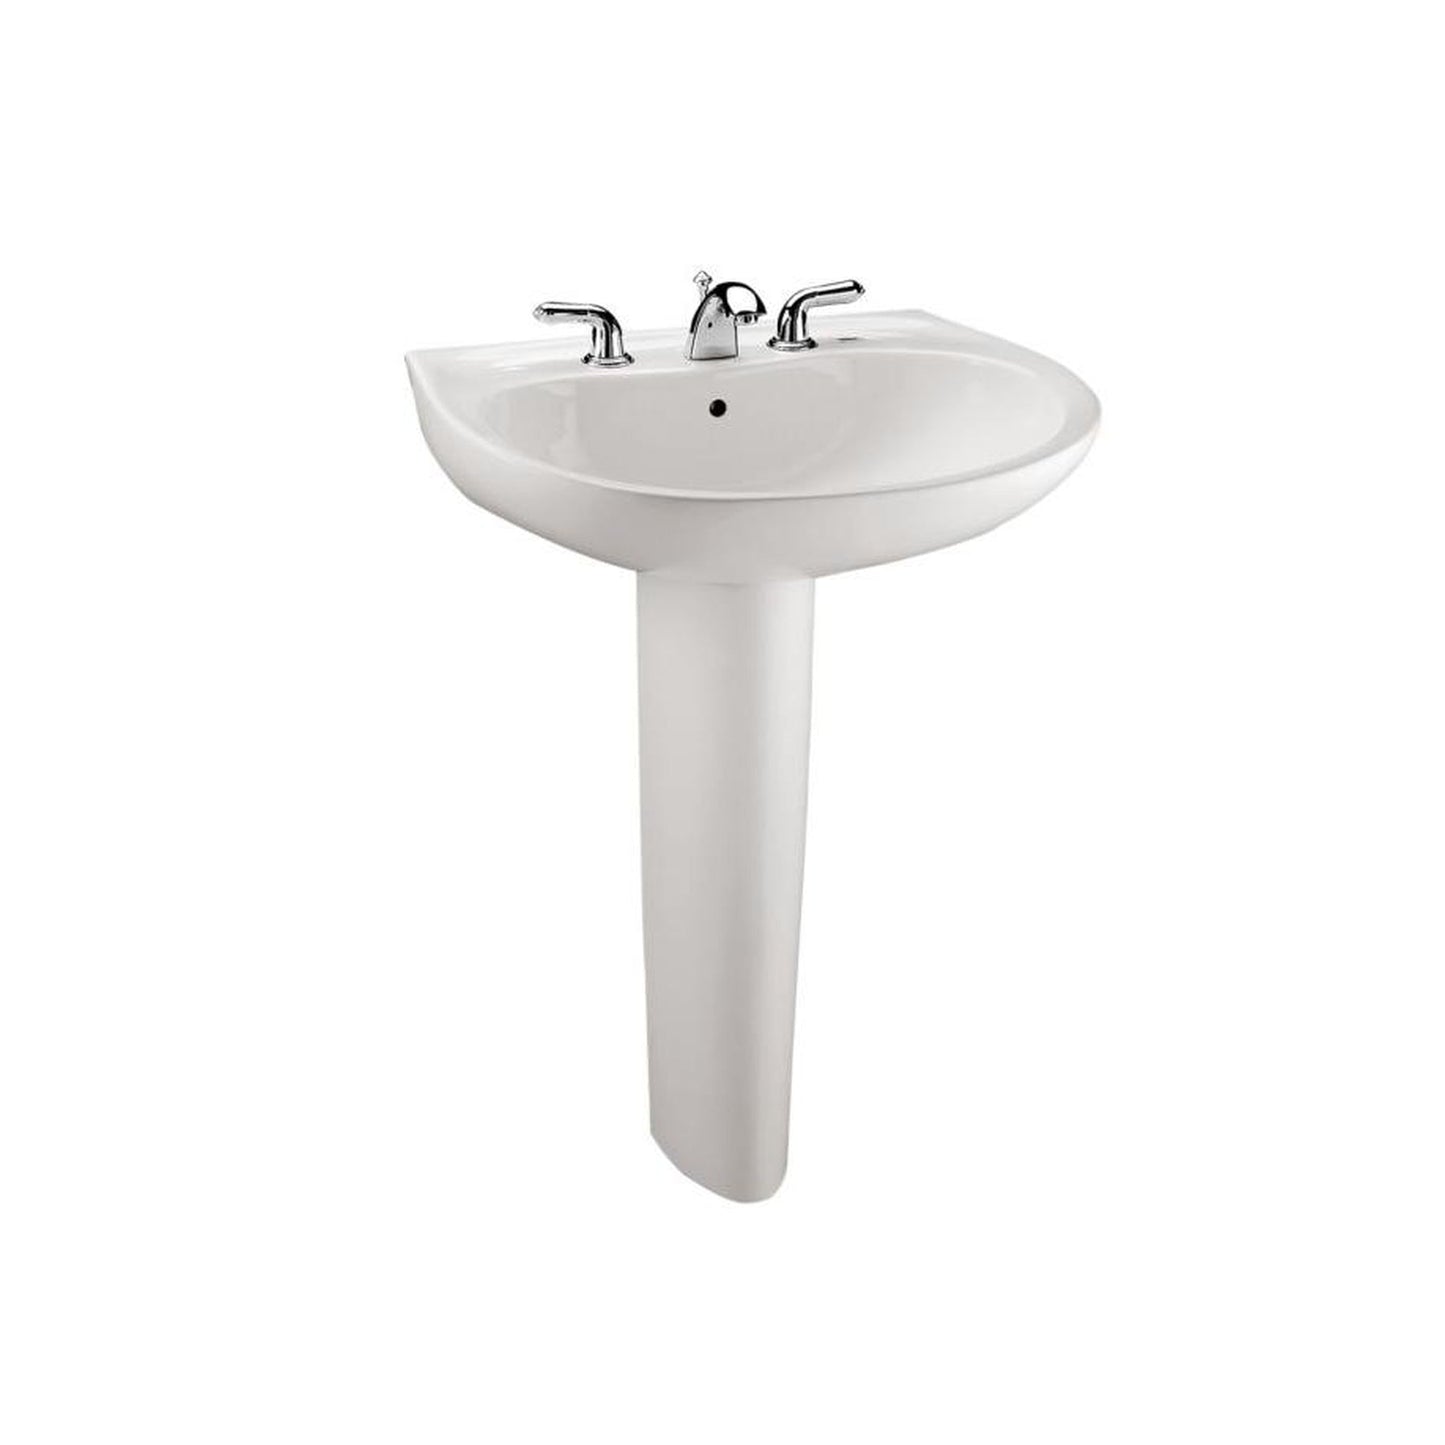 Toto Prominence 8” Center Lav & Ped Colonial White